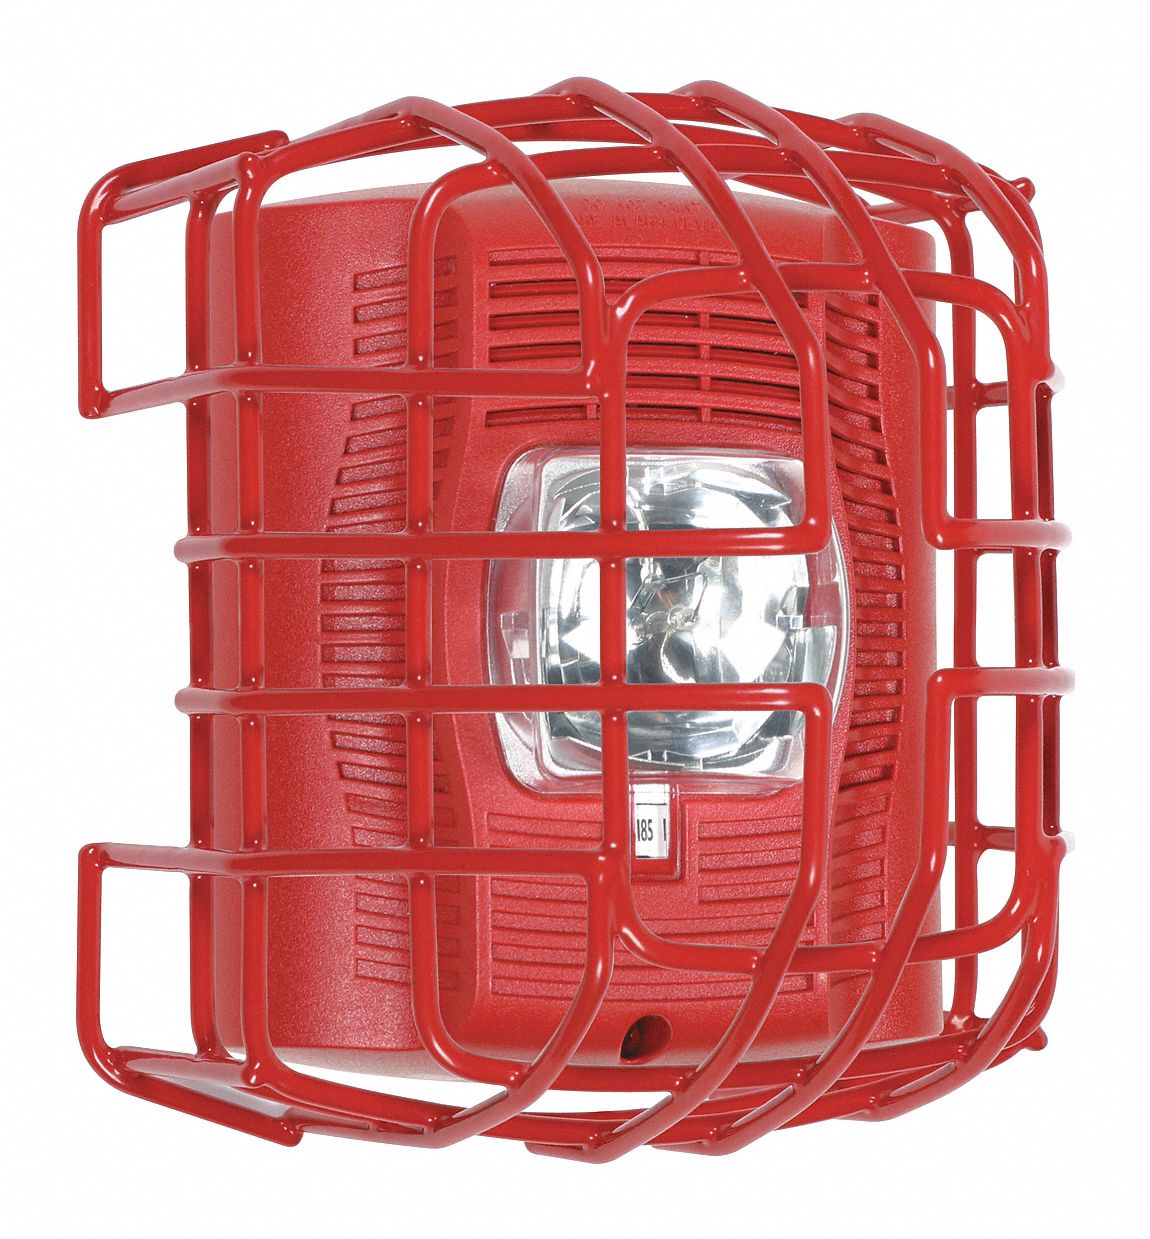 16D844 - 9-ga wire cage protects horn/strobe/spkr